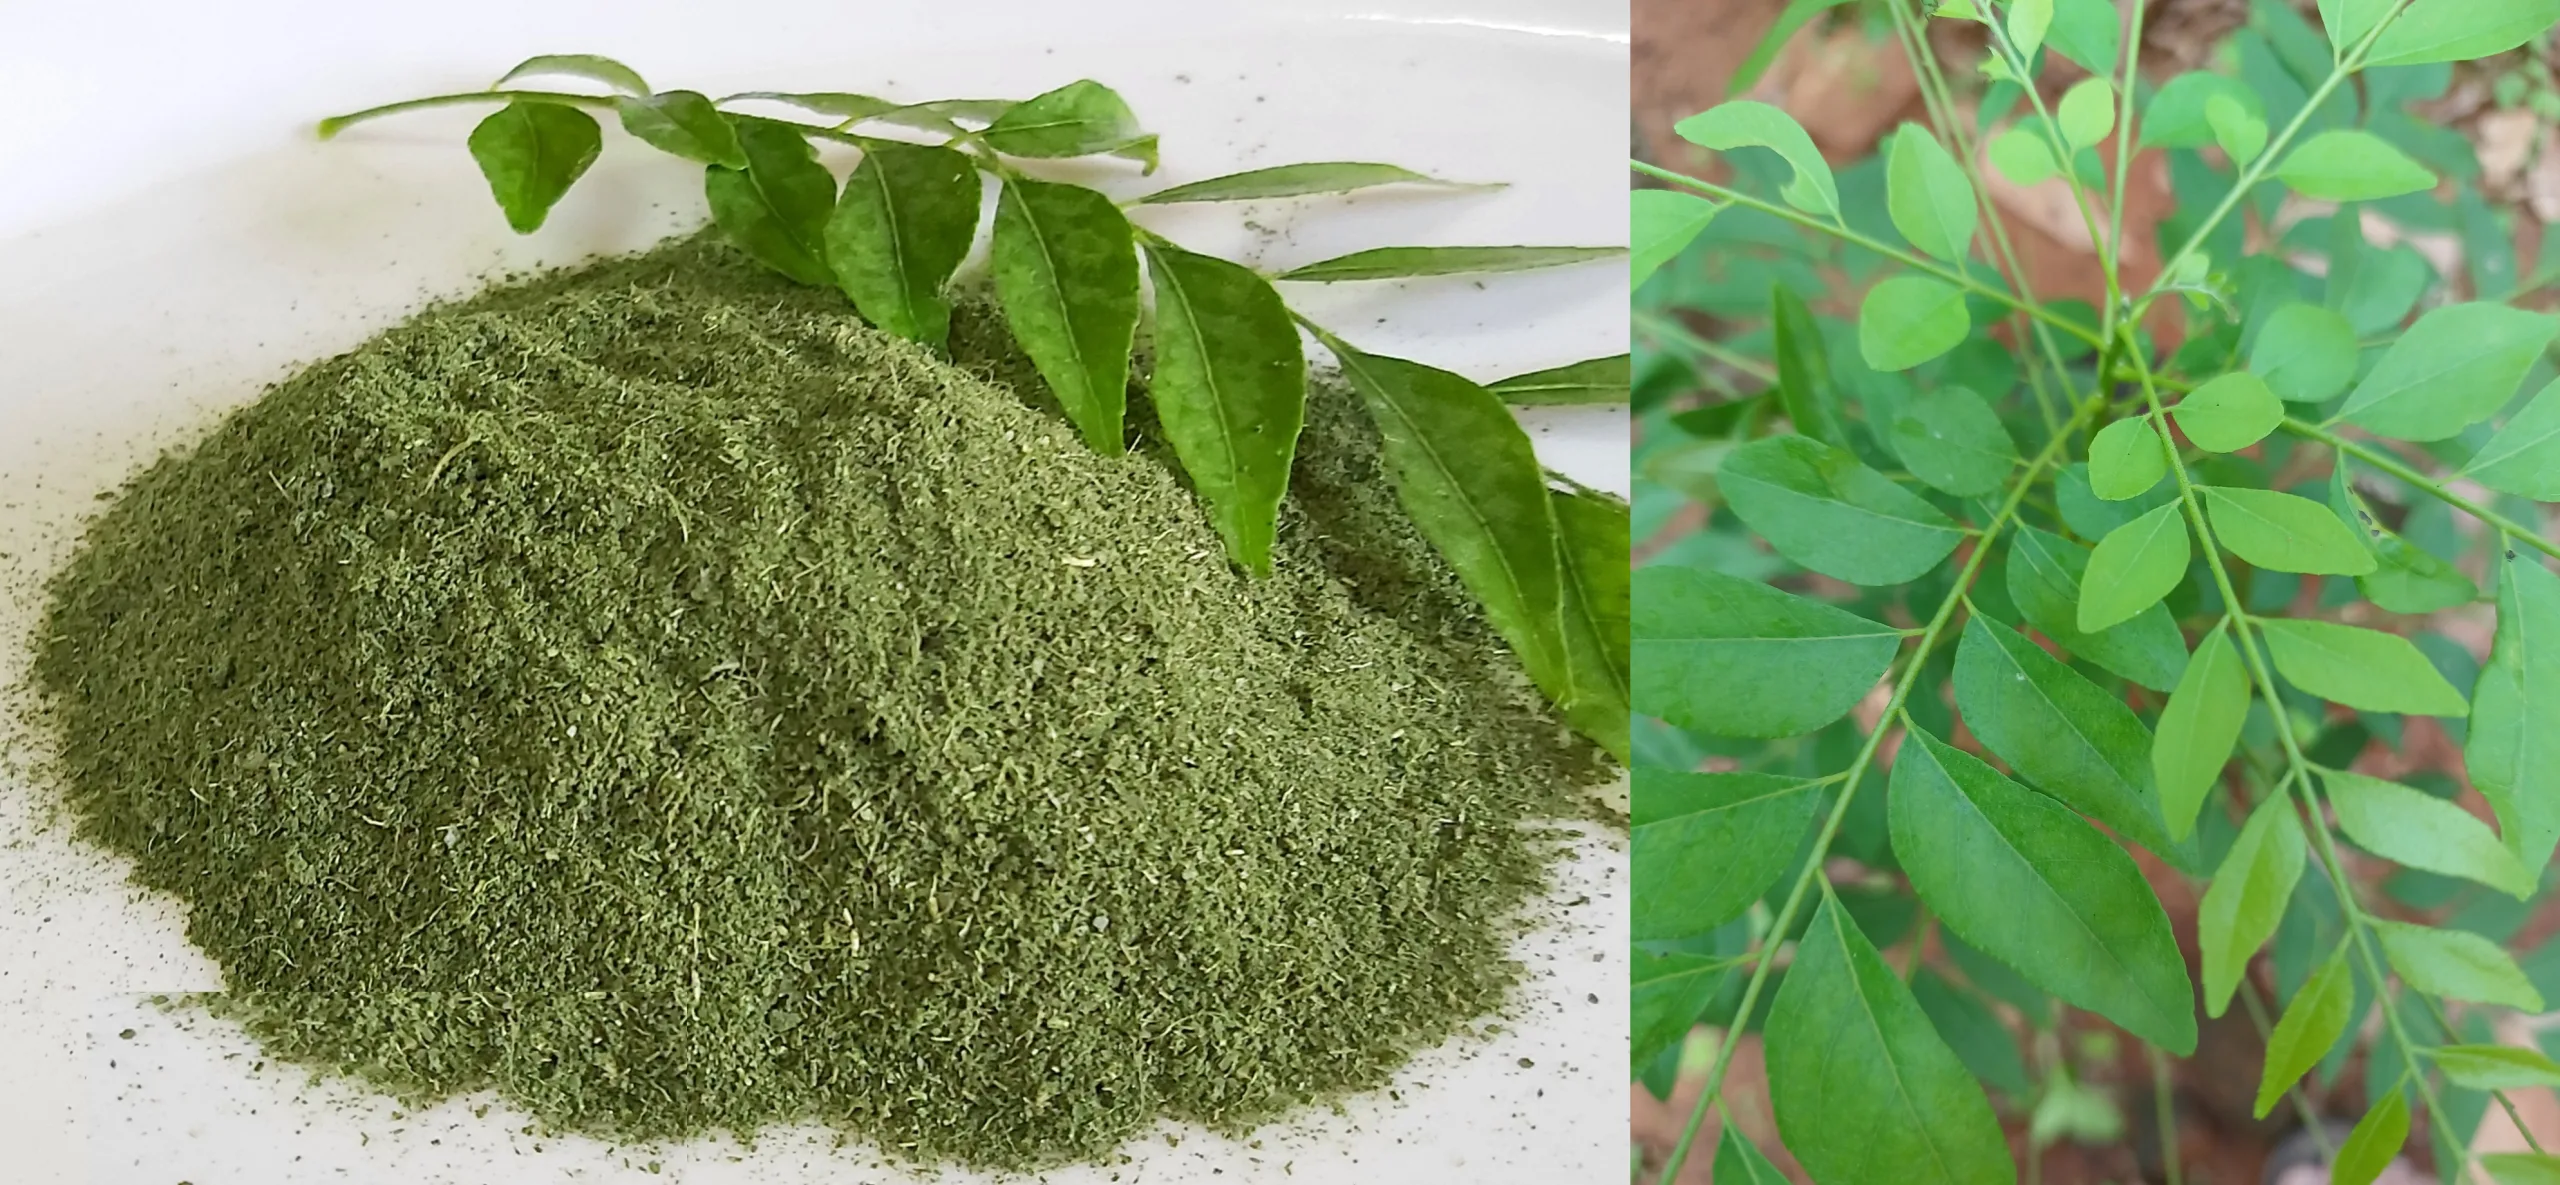 Health Benefits of Curry Leaves